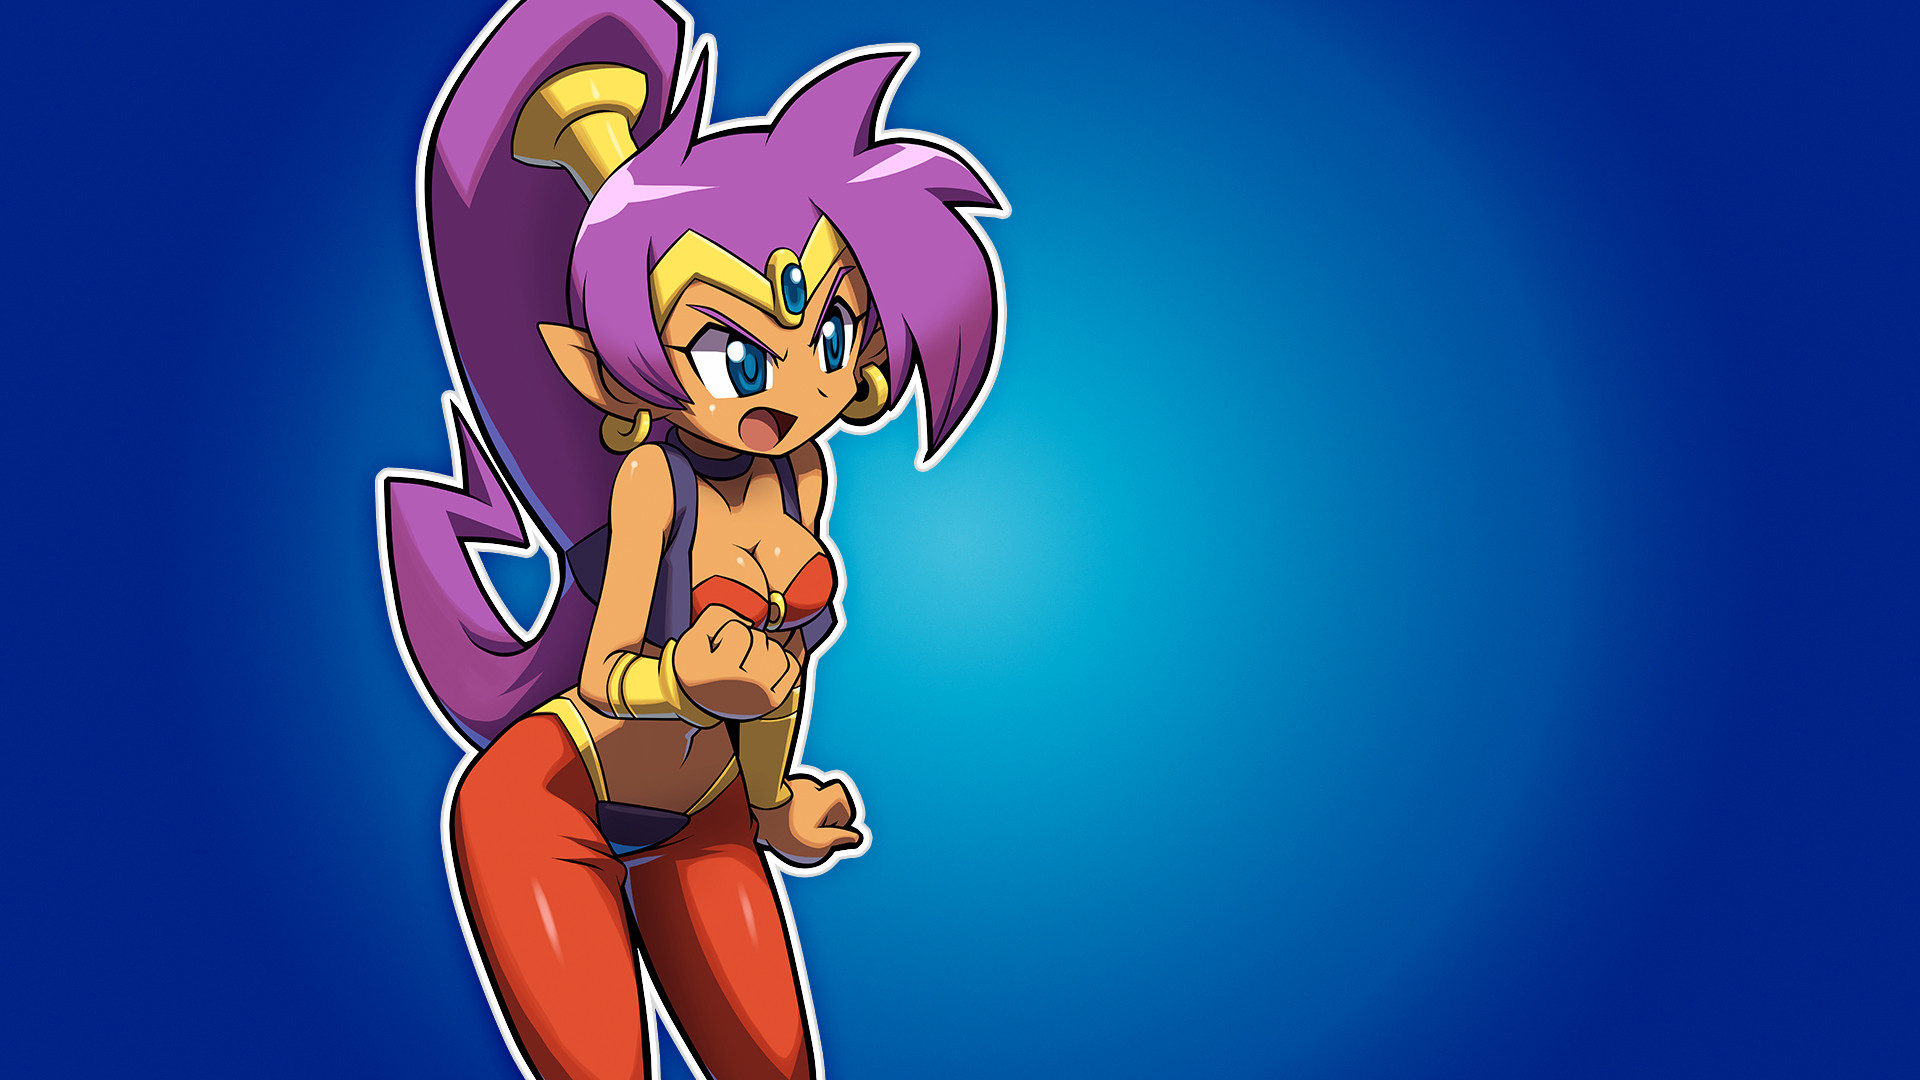 1920x1080 I made some vidya wallpapers. Starting with Shantae and moving /wg/ Wallpapers/General